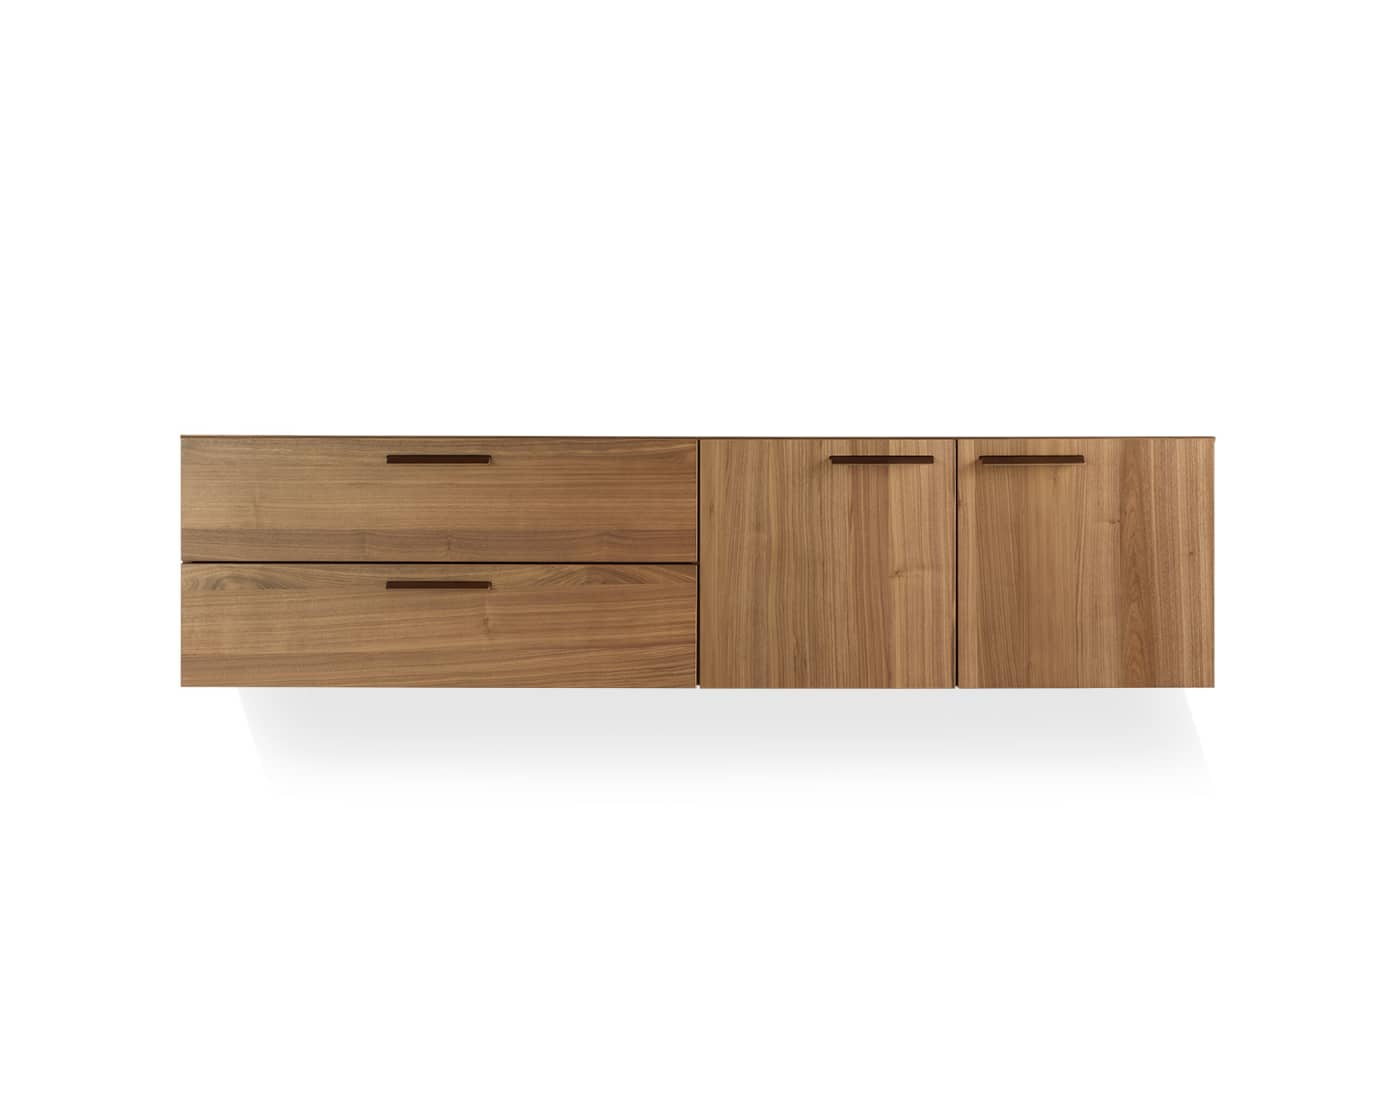 Shale 2 Door / 2 Drawer Wall-Mounted Cabinet